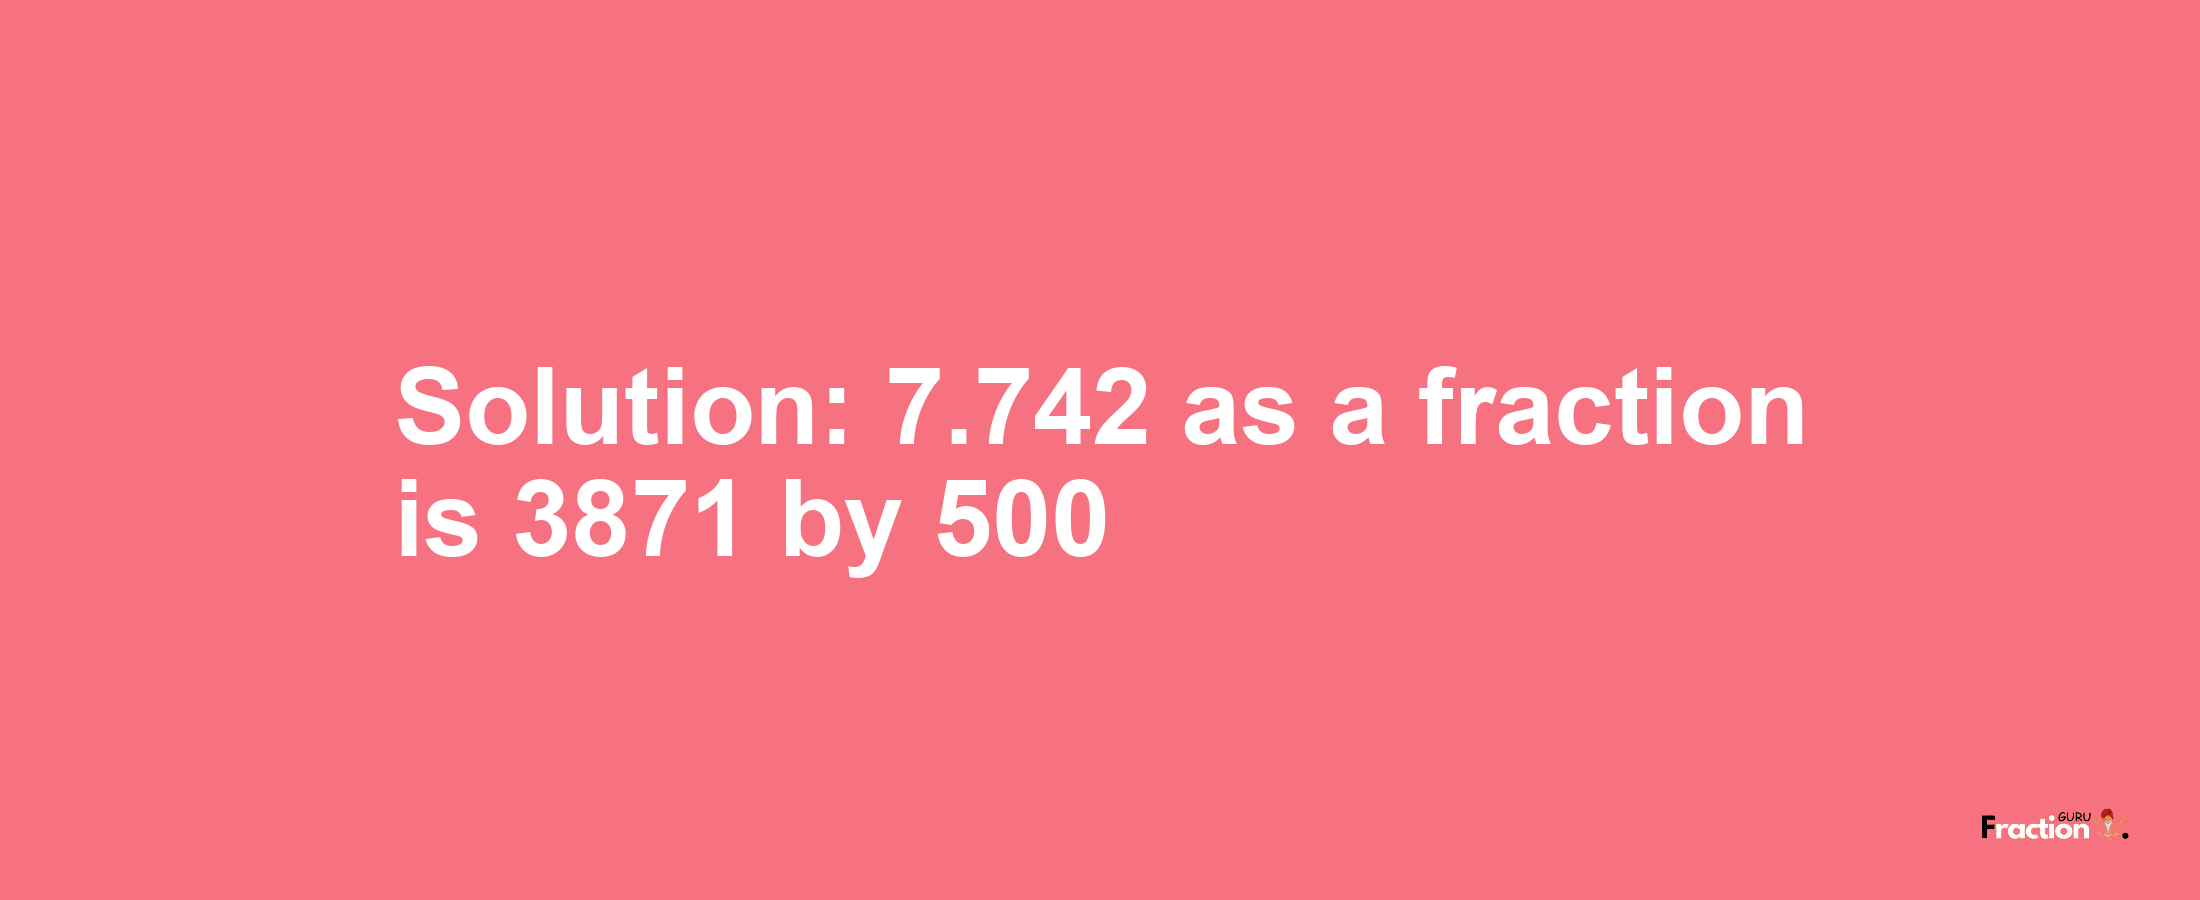 Solution:7.742 as a fraction is 3871/500